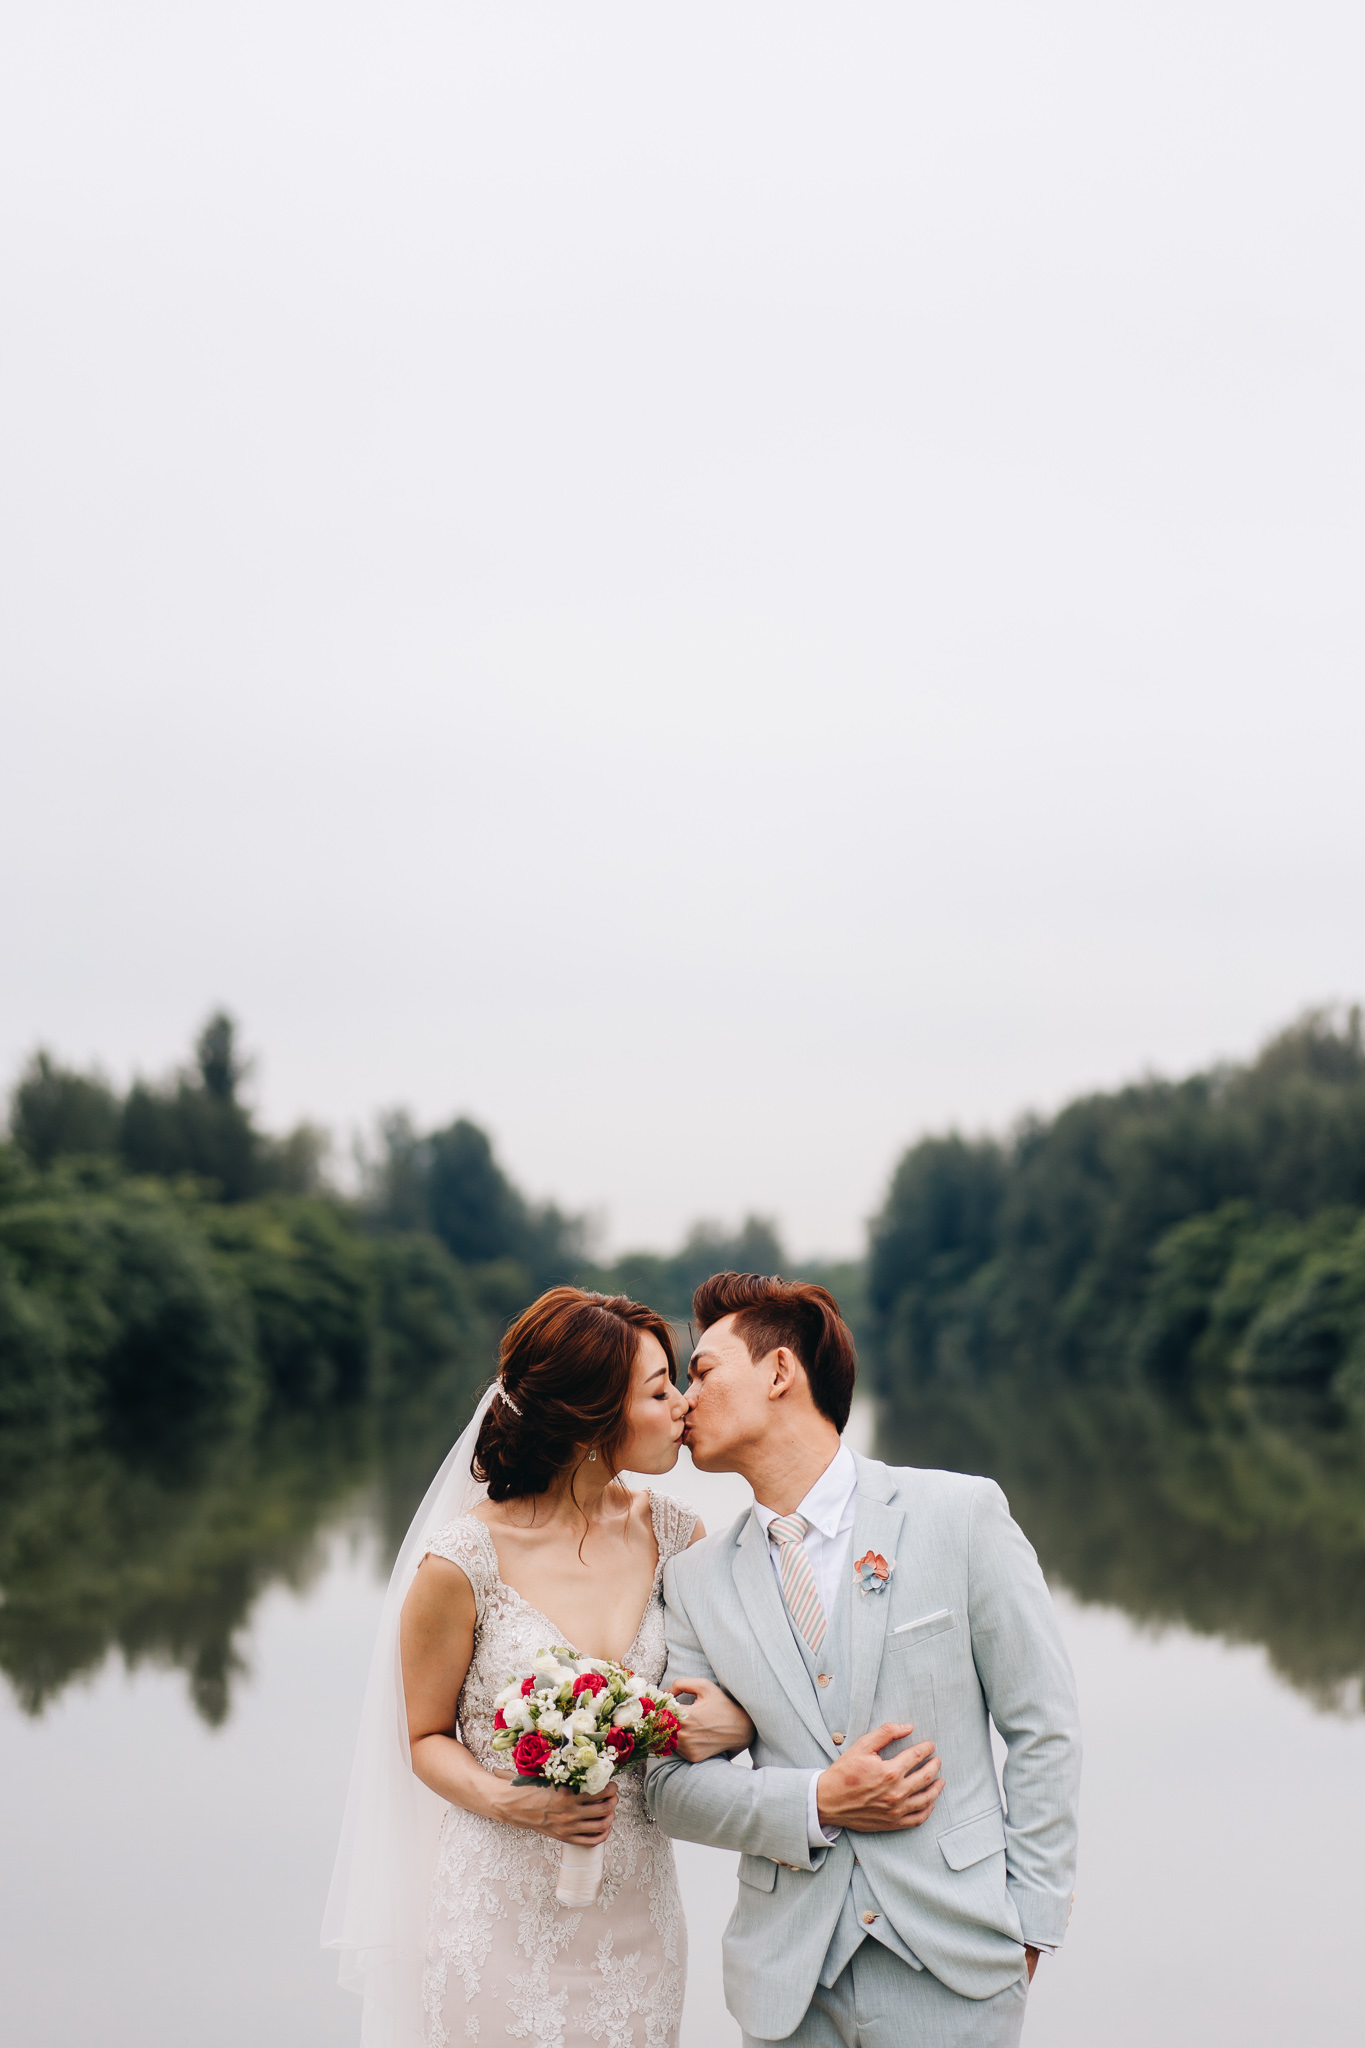 Cindy & Kevin Wedding Day Highlights (resized for sharing) - 112.jpg